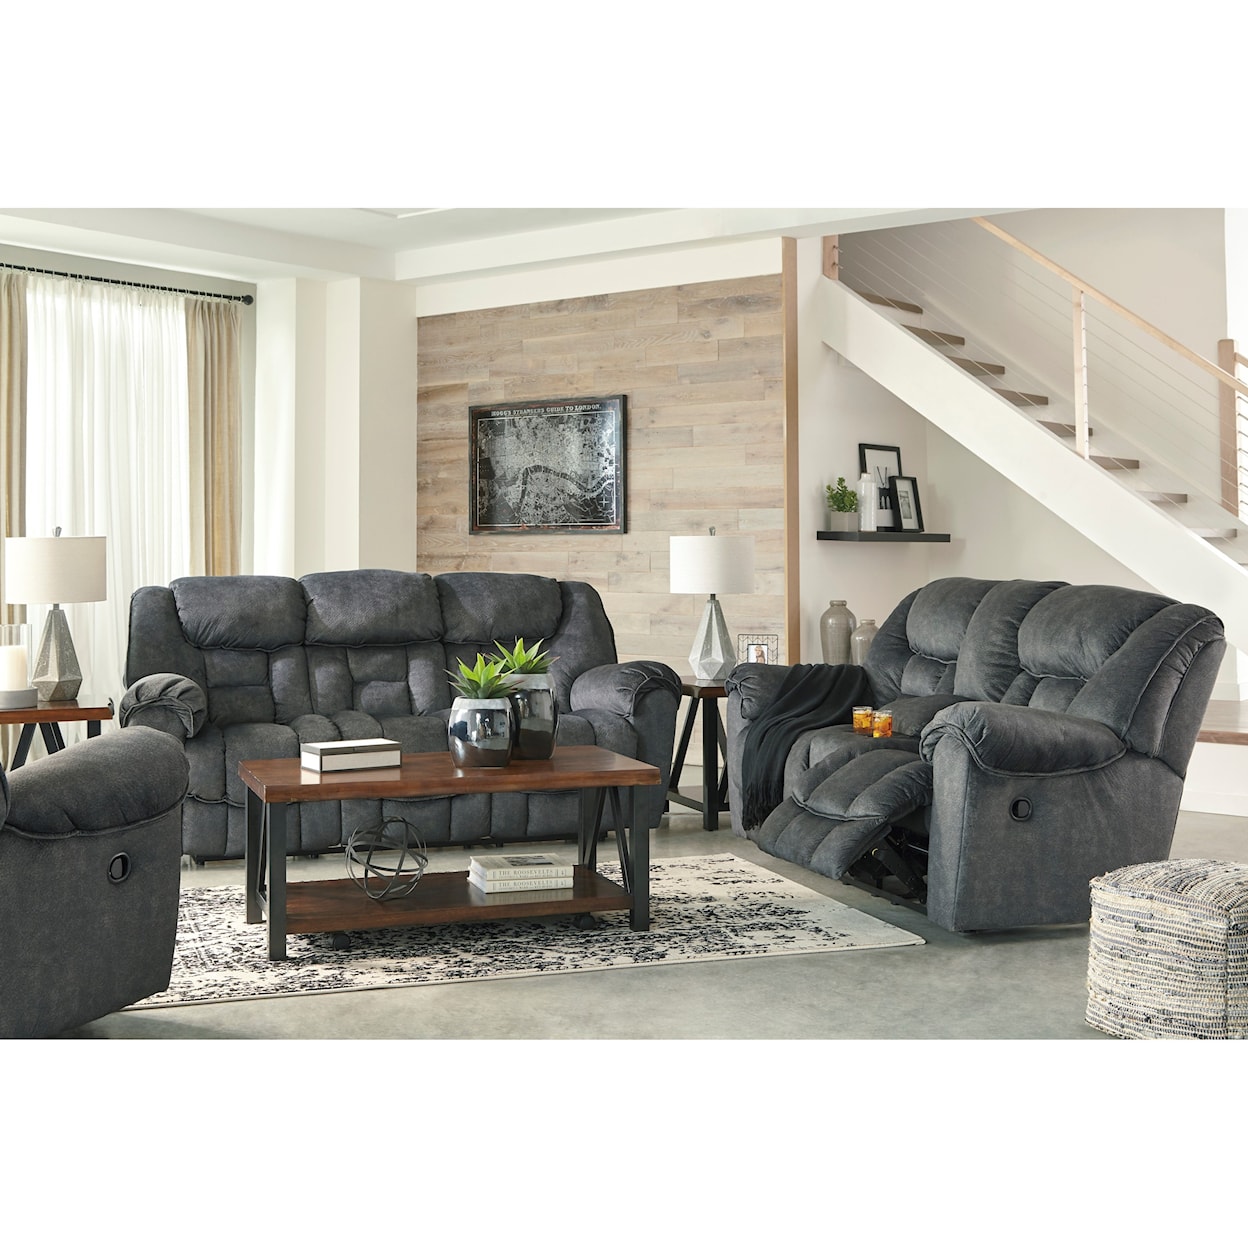 Signature Design by Ashley Furniture Capehorn Double Reclining Loveseat w/ Console